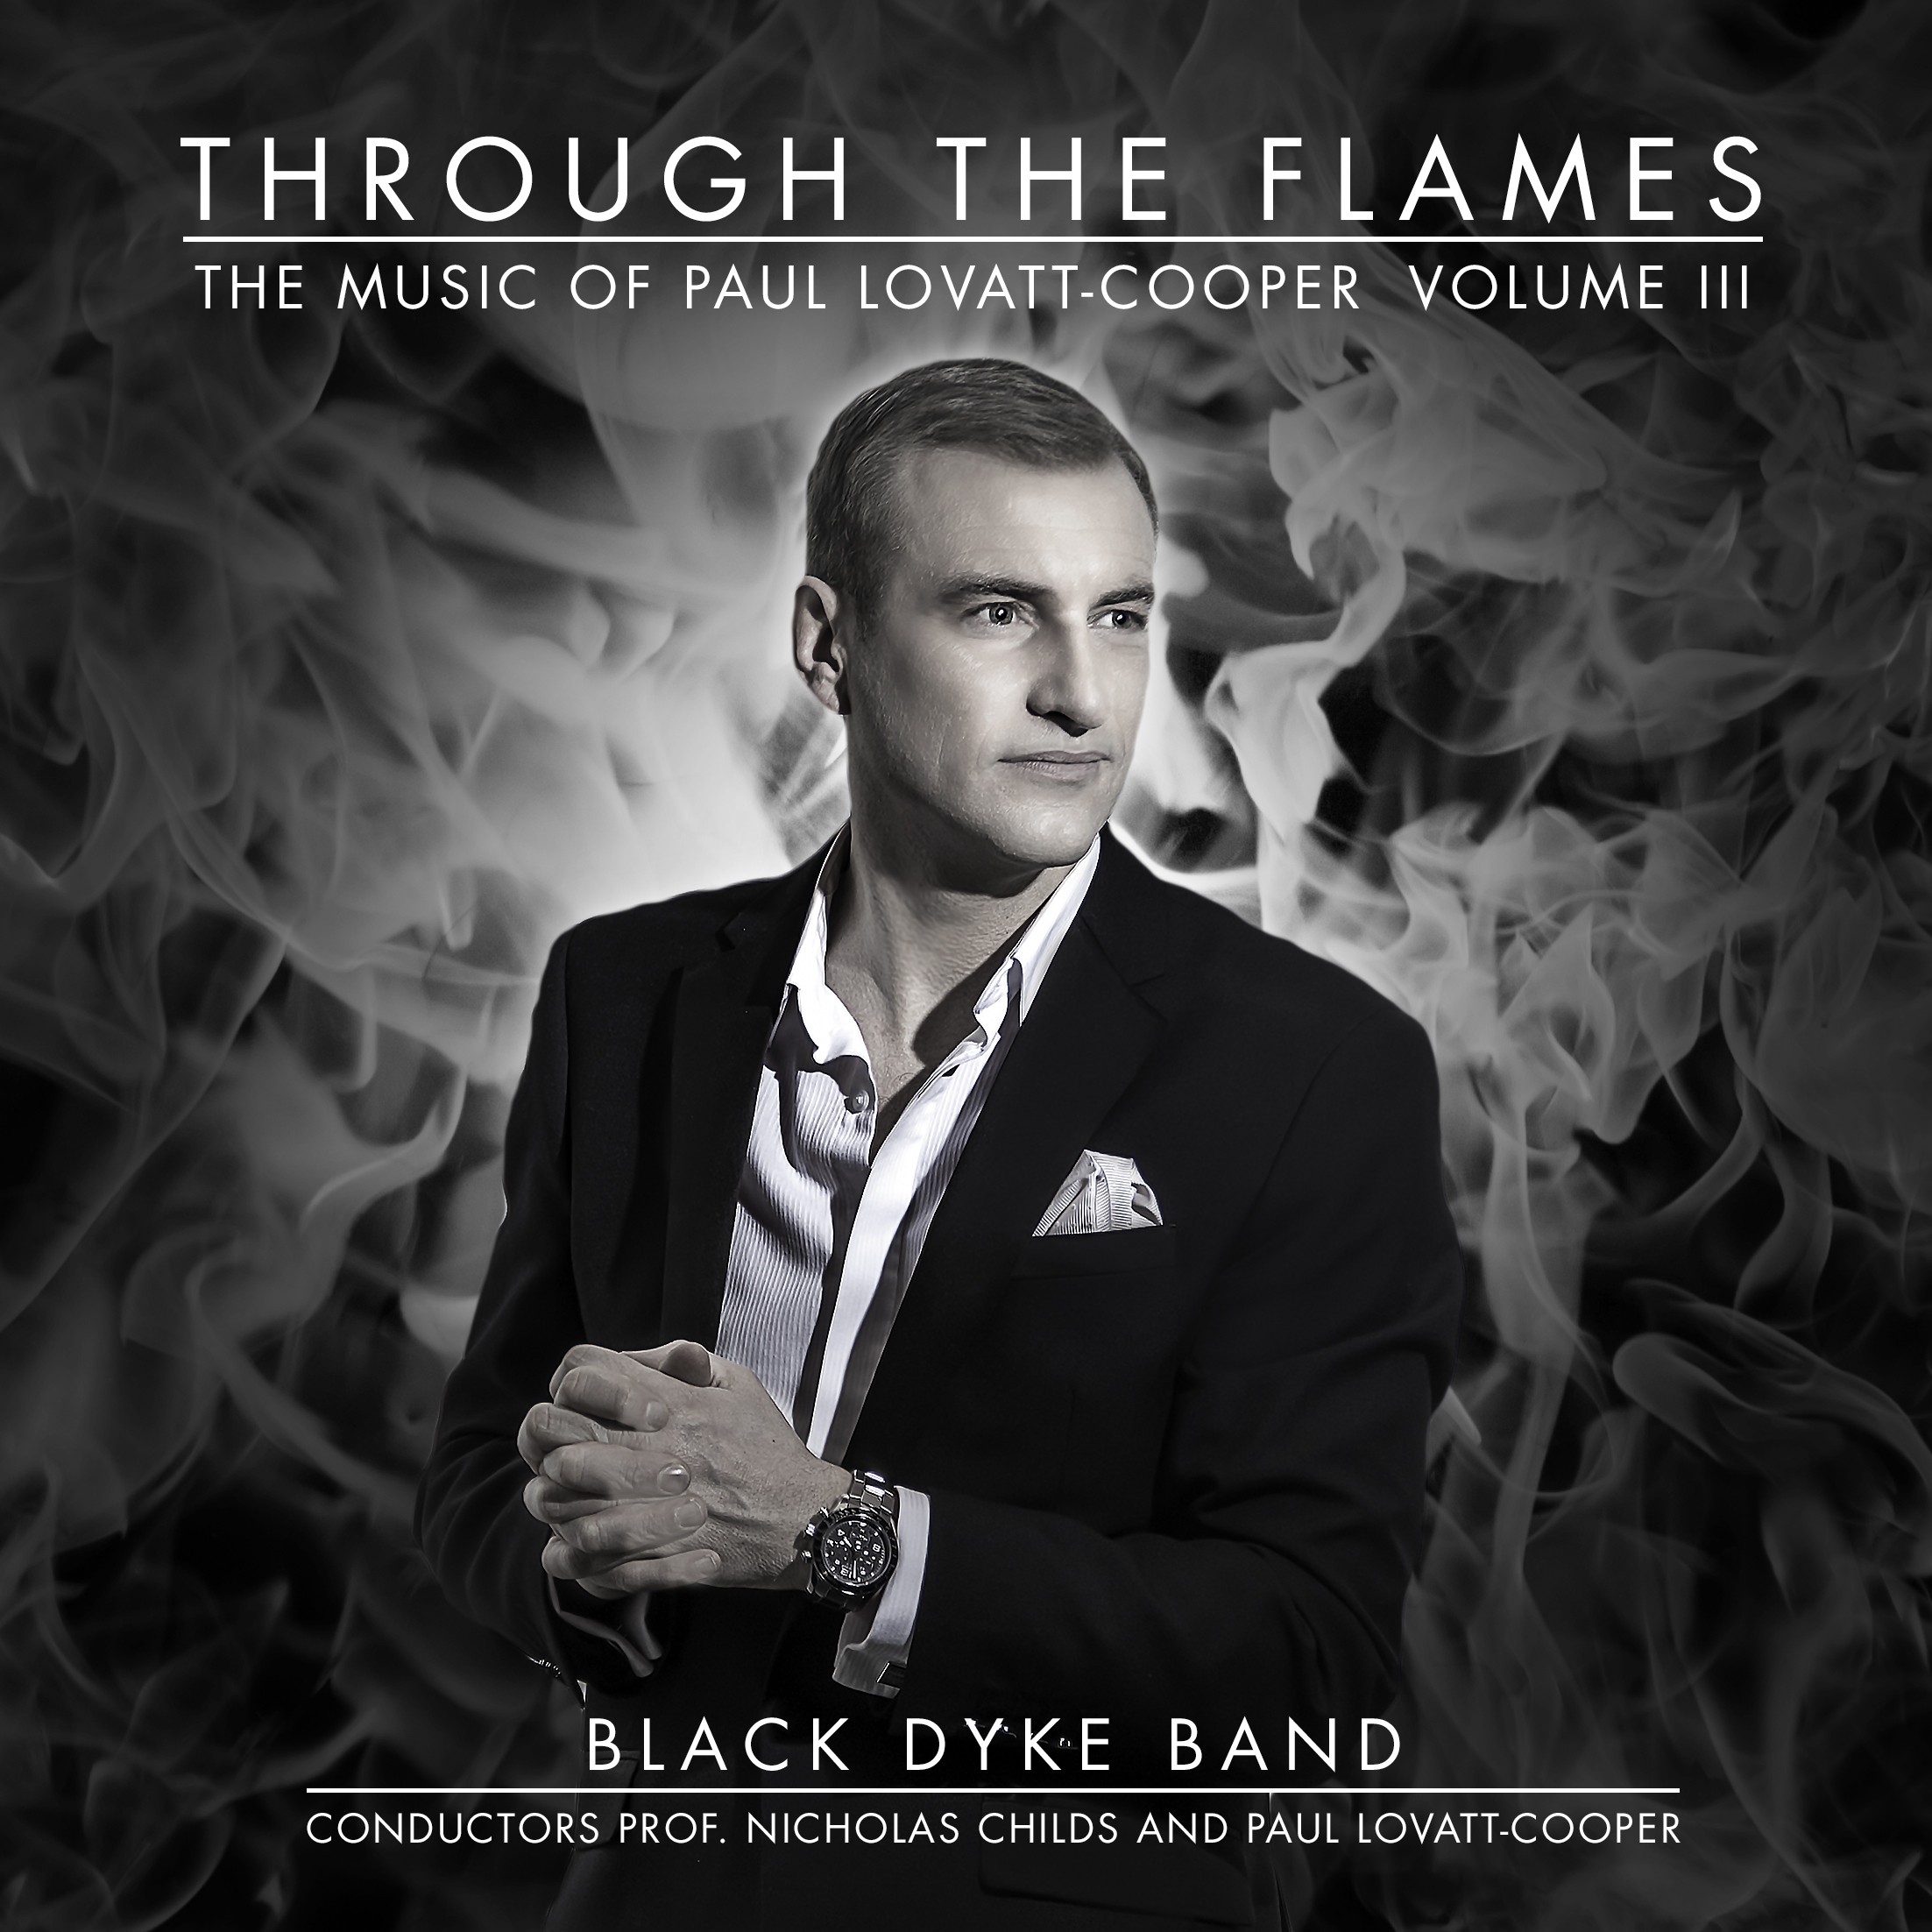 Through the Flames - The Music of Paul Lovatt-Cooper Vol. III - Download